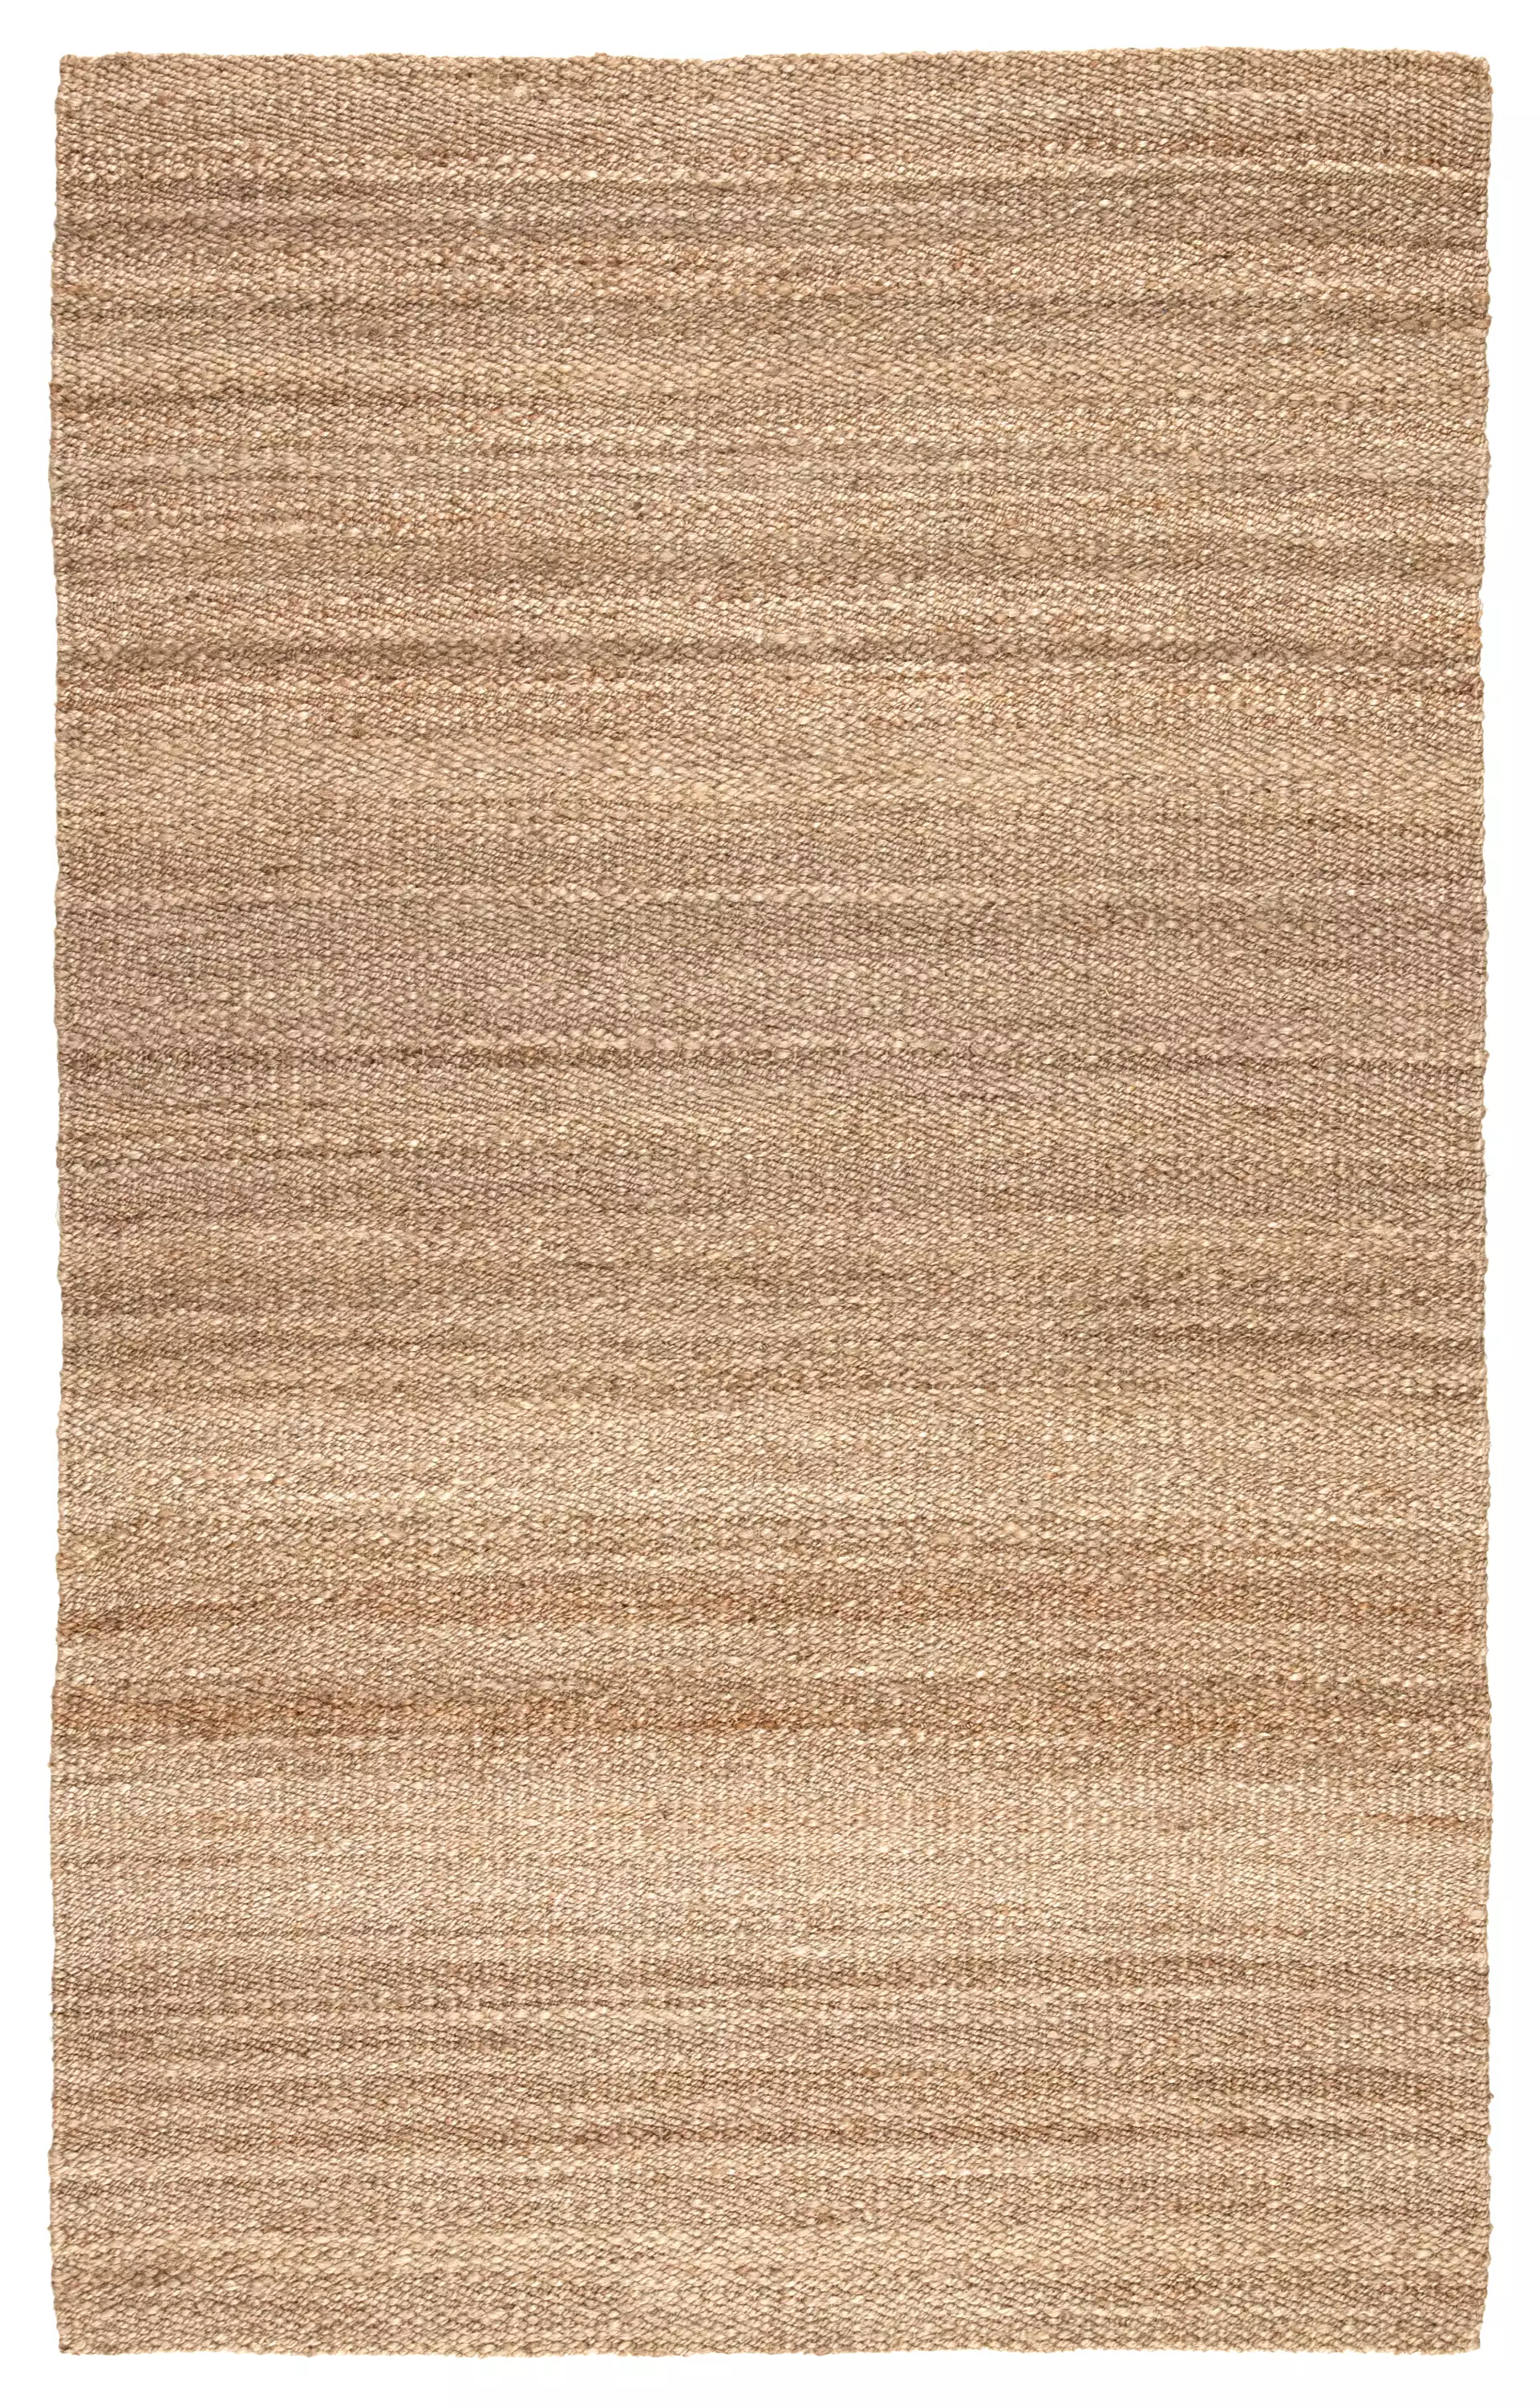 Hilo Natural Solid Tan Area Rug (2'X3')